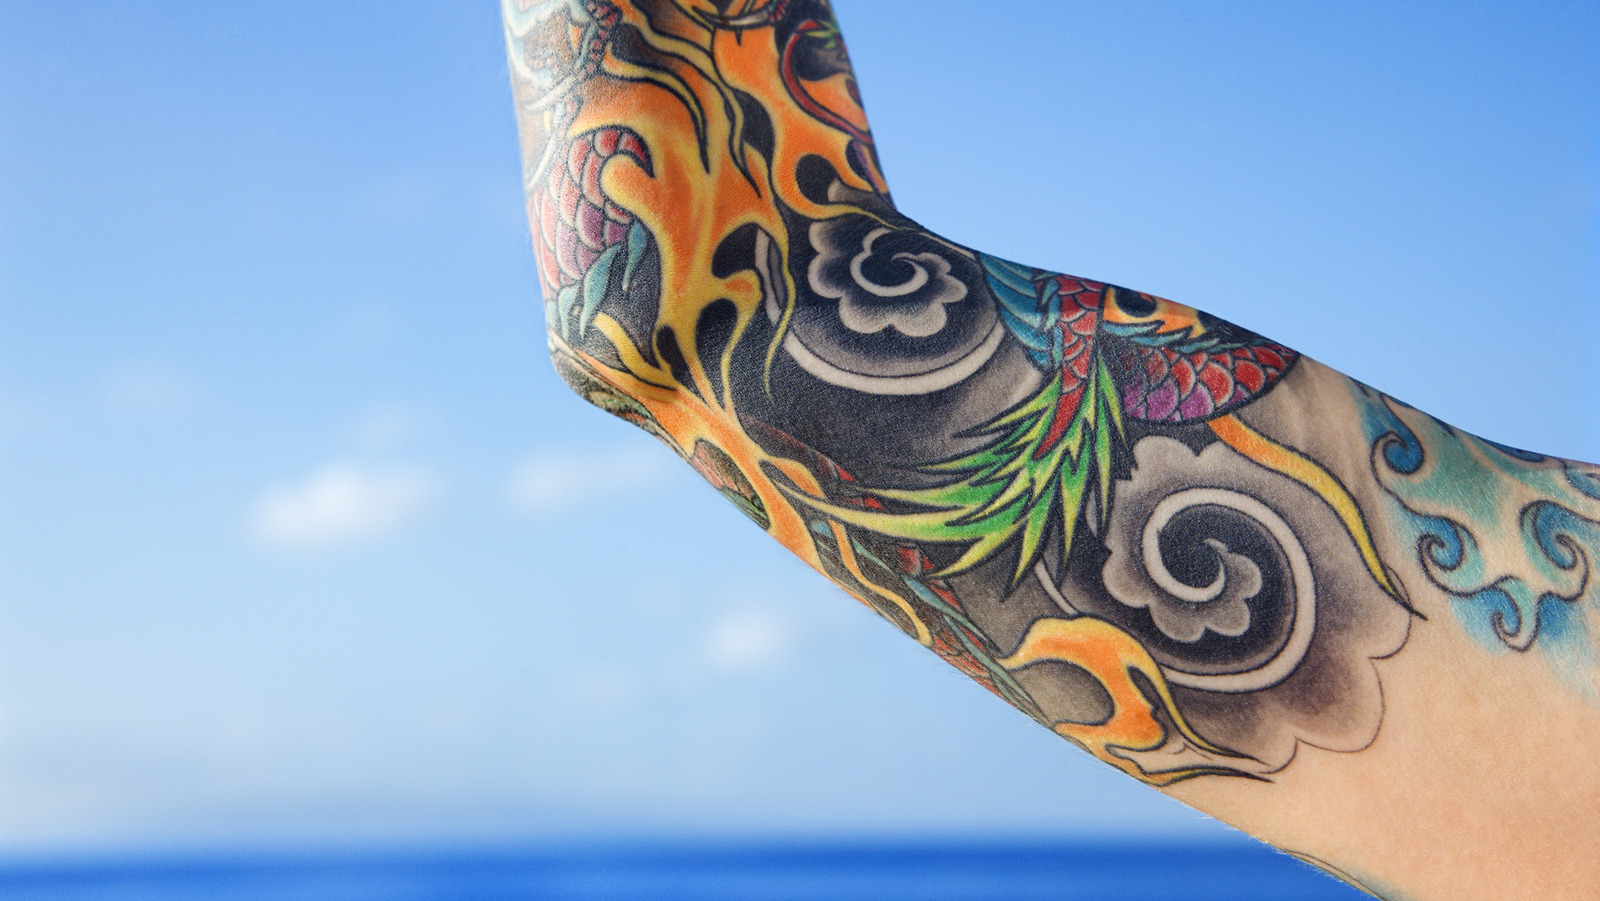 7 tattoos that could get you in serious trouble | Metro News